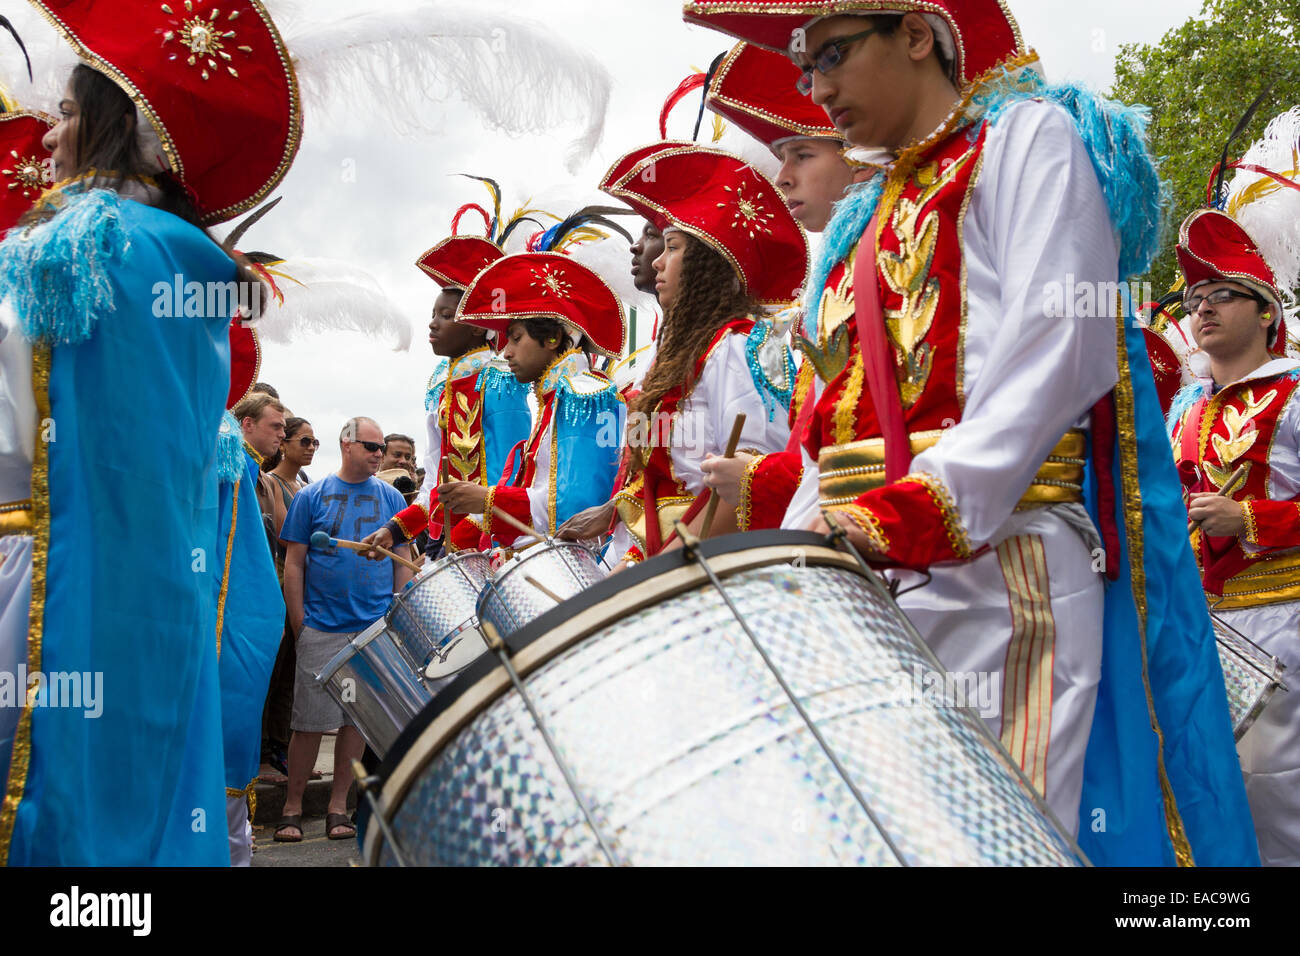 Marching drummers at the Carnaval Del Pueblo in South London England. The Carnival De Pueblo is an Latin American festival. Stock Photo